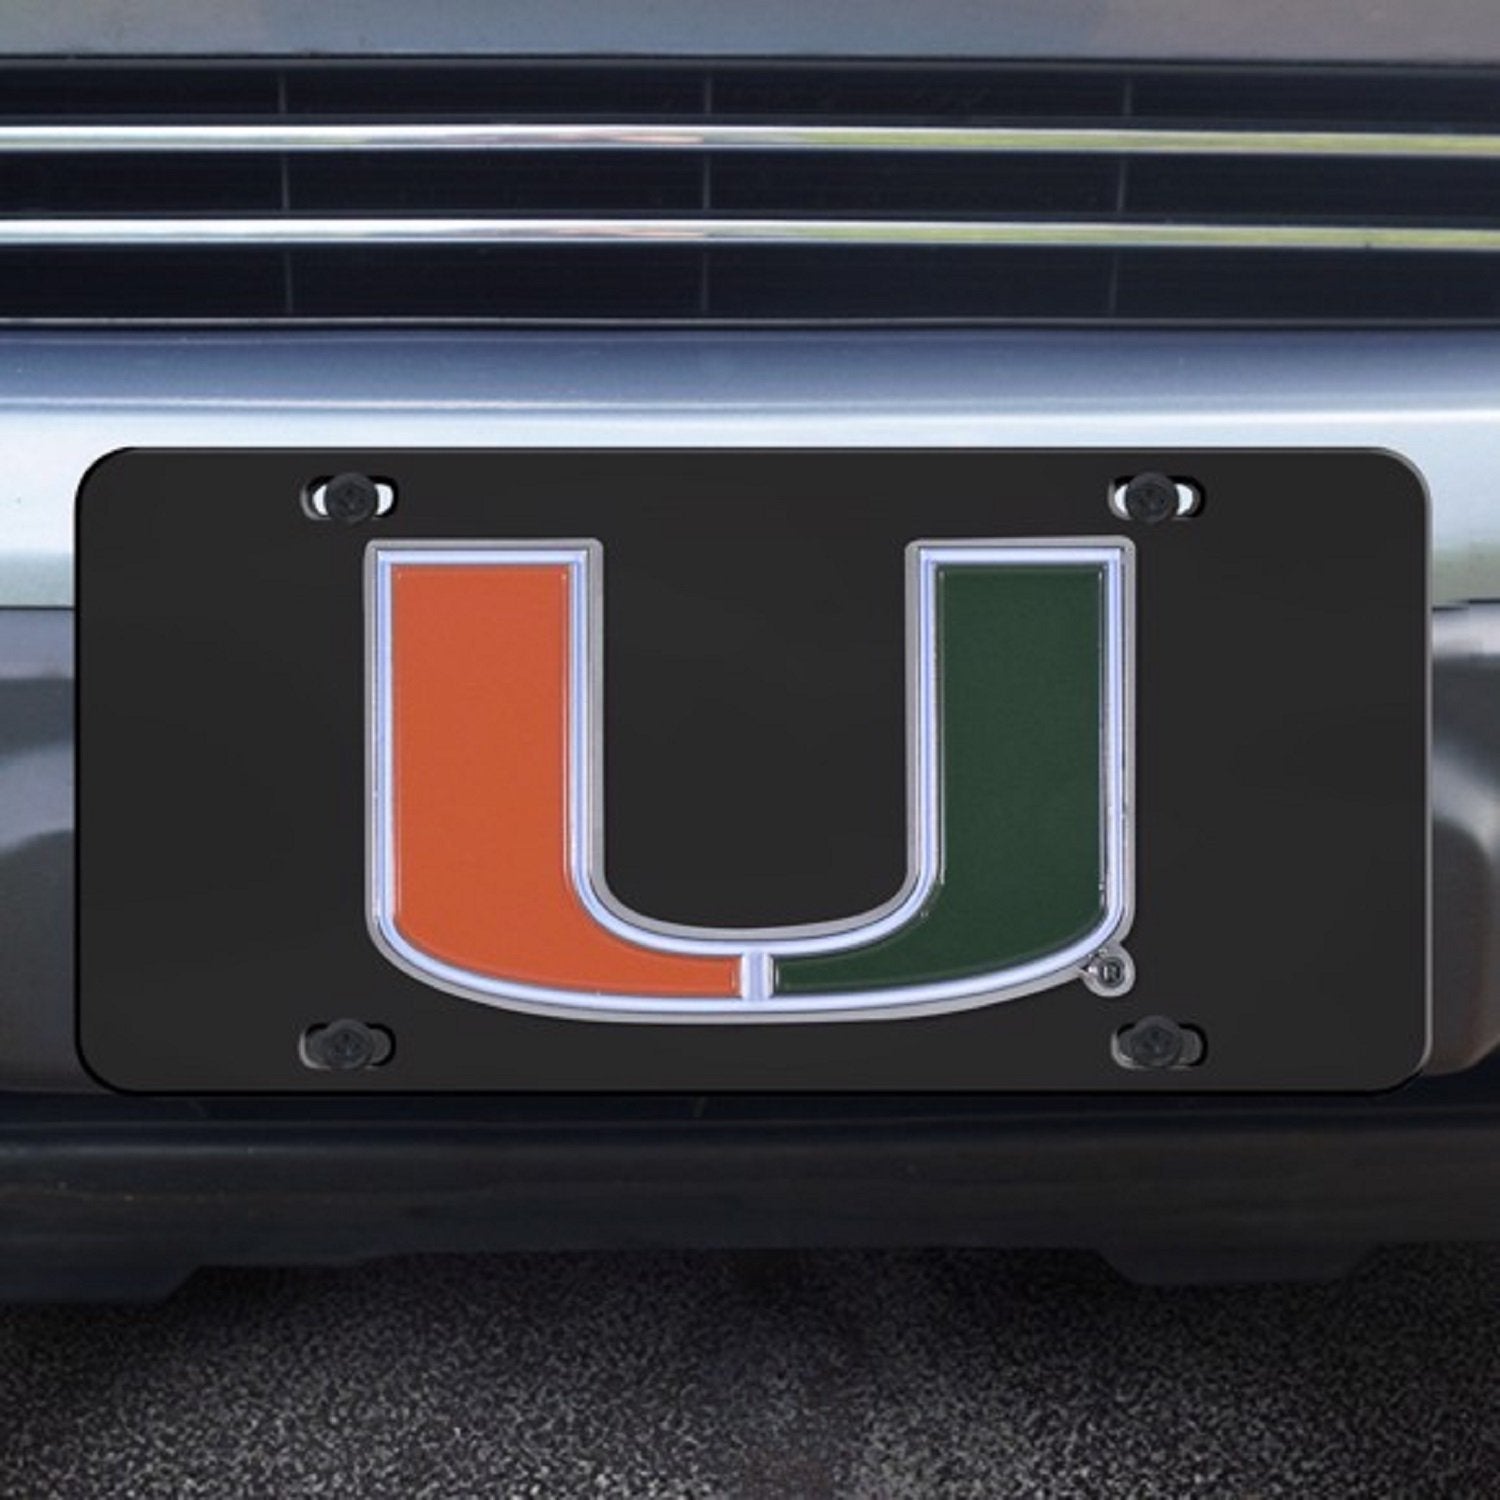 University of Miami Hurricanes License Plate Tag, Premium Stainless Steel Diecast, Black, Raised Solid Metal Color Emblem, 6x12 Inch